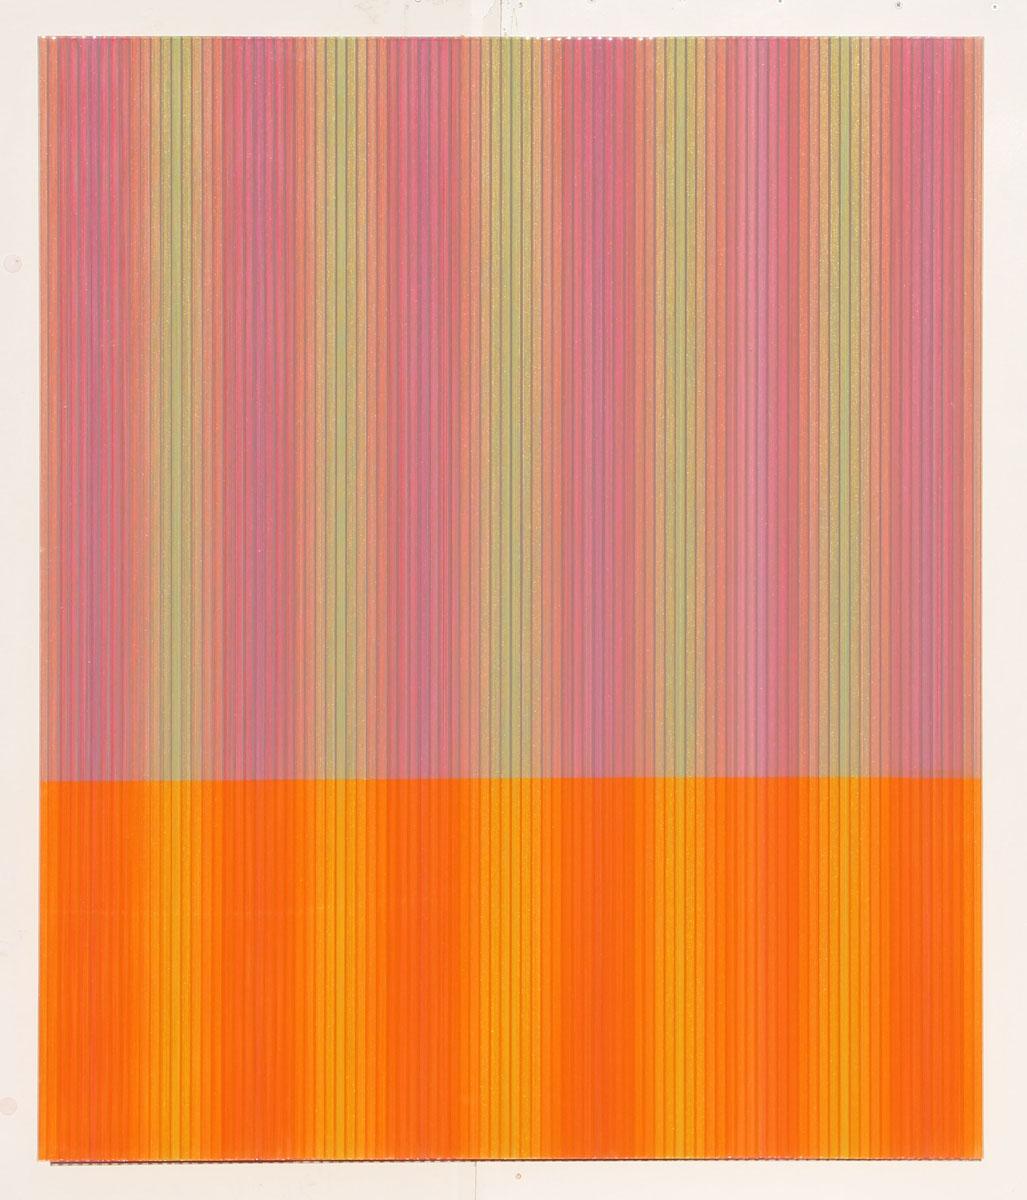 Rachel Wickremer Abstract Painting - Haze - Contemporary Acrylic Artwork: Retro Style, Simple, Colourful and Linear 